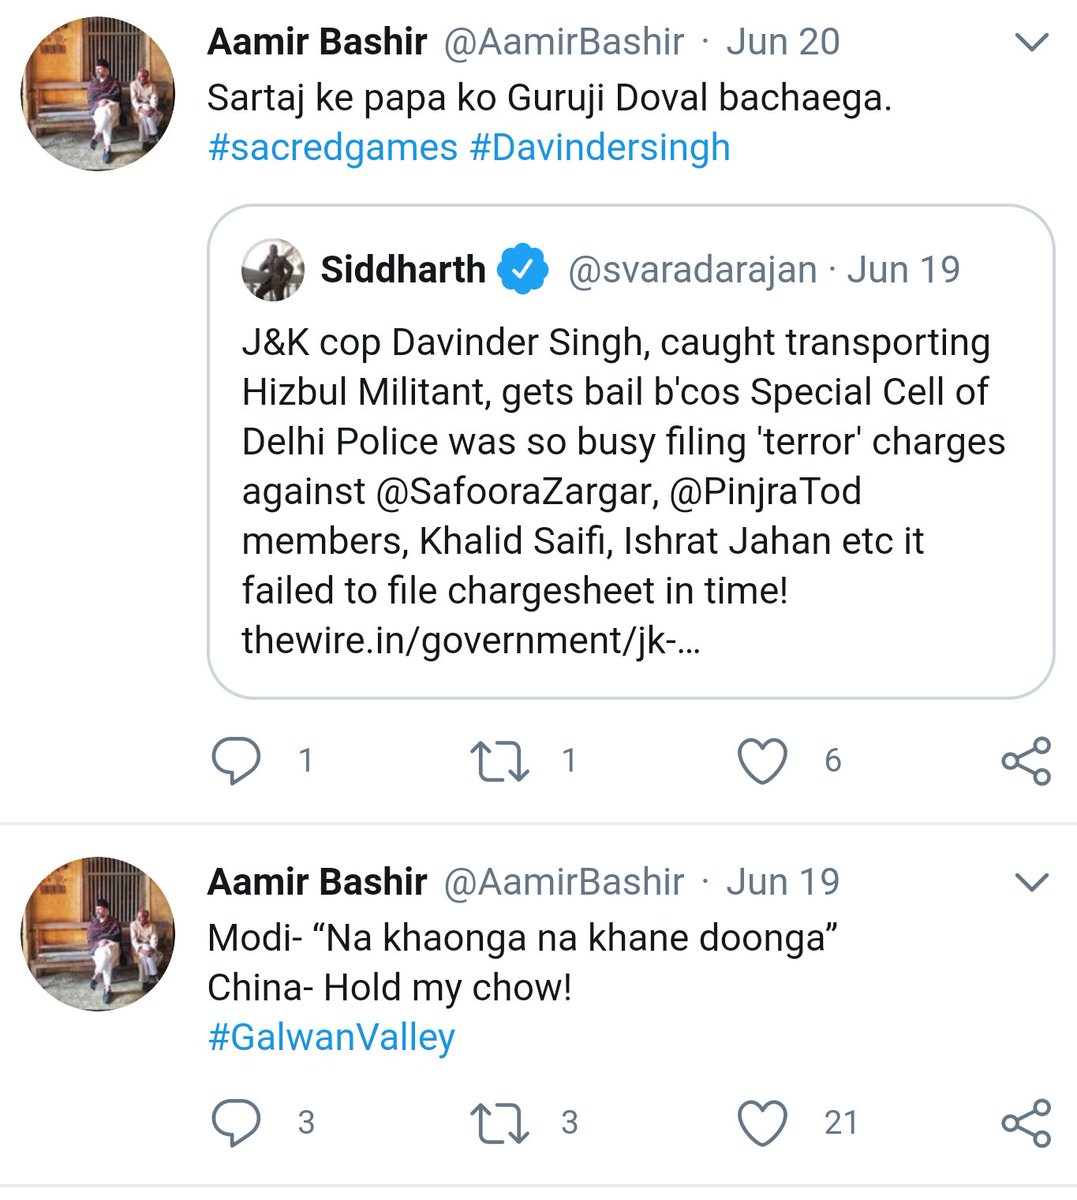 Amir Bashir, hubby of  @foxstarhindi creative commissioning head timeline is filled with anti Modi, Anti Indian SC, Anti Indian army basically deep India hate bile.